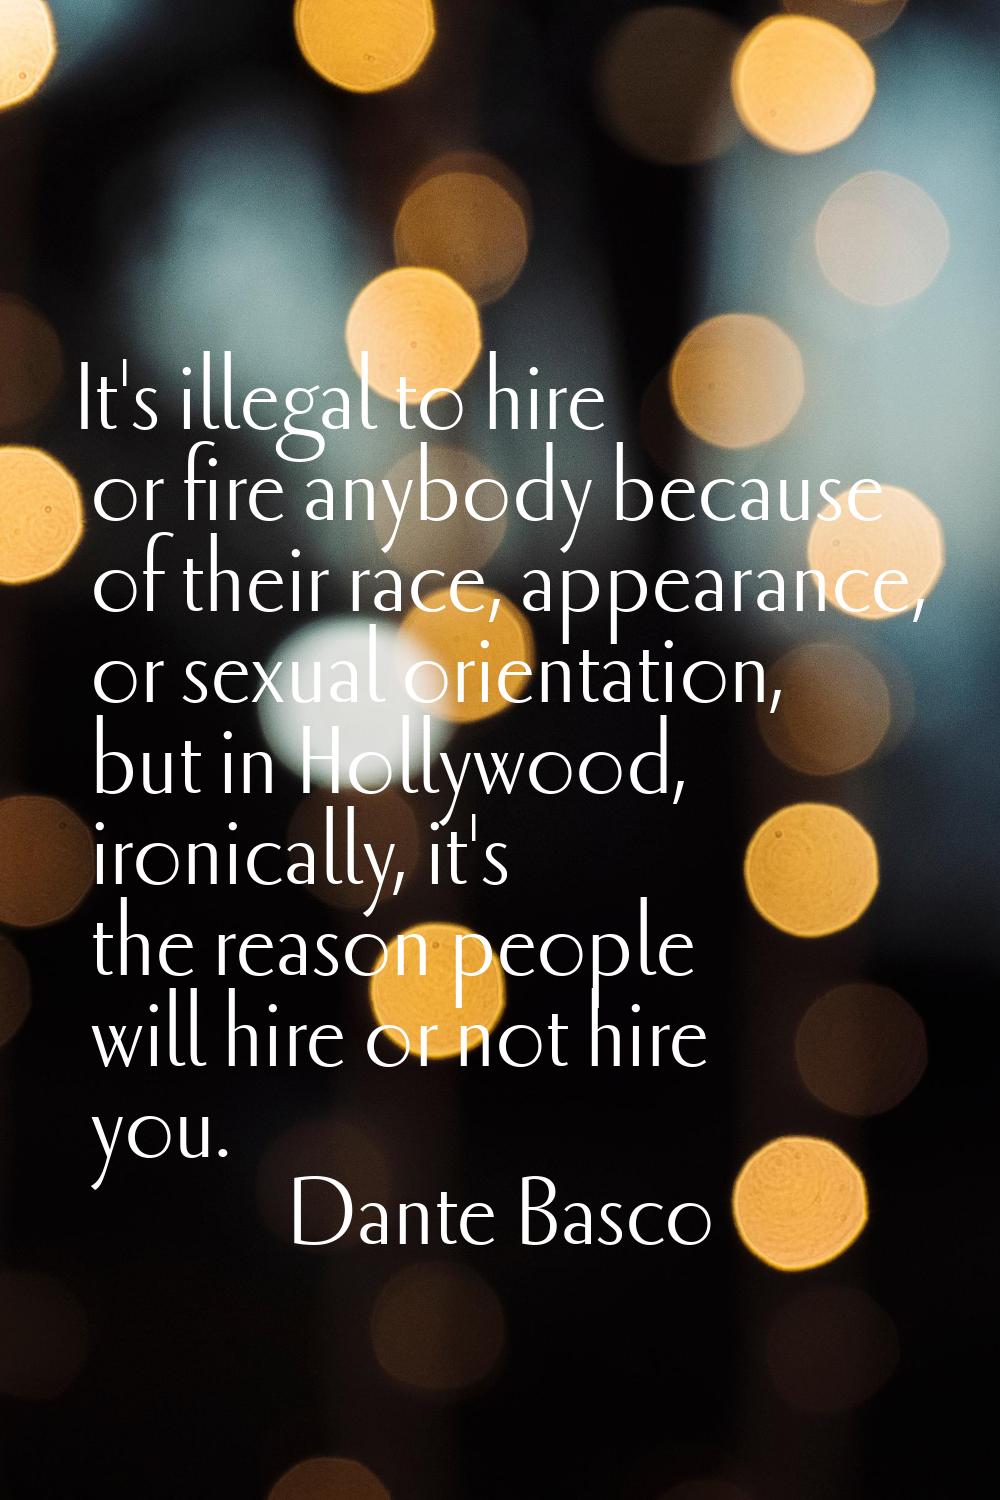 It's illegal to hire or fire anybody because of their race, appearance, or sexual orientation, but 